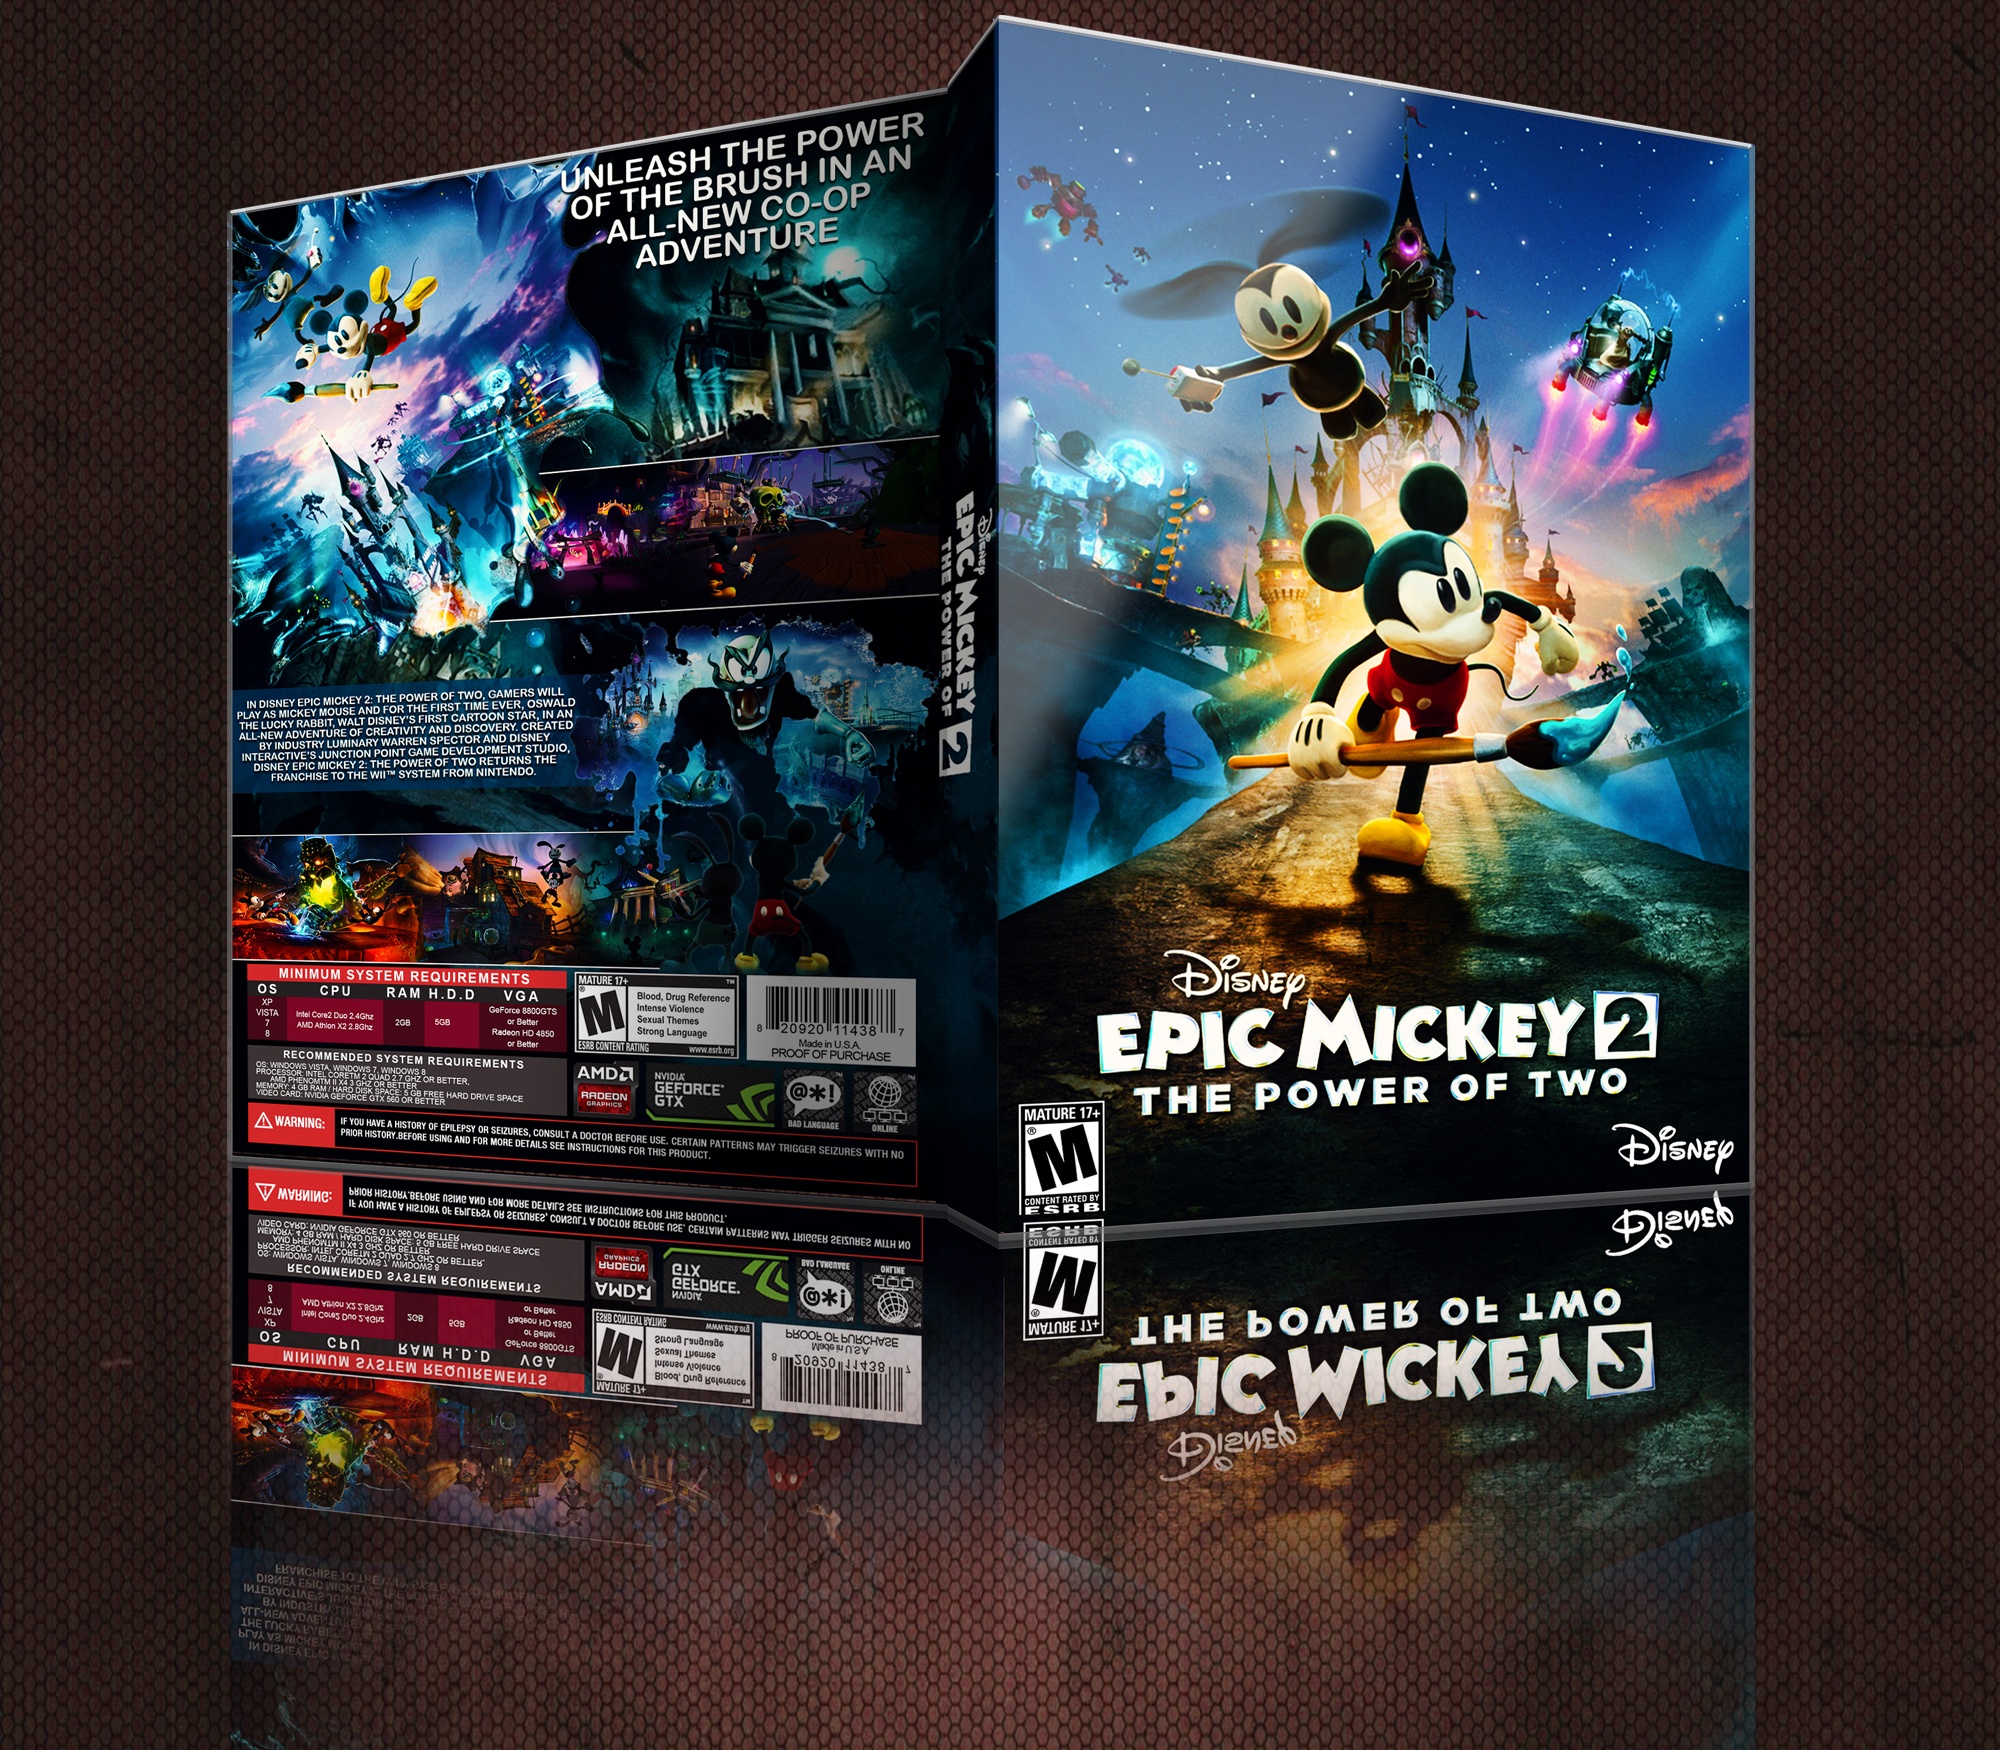 Disney Epic Mickey 2 The Power Of 2 box cover